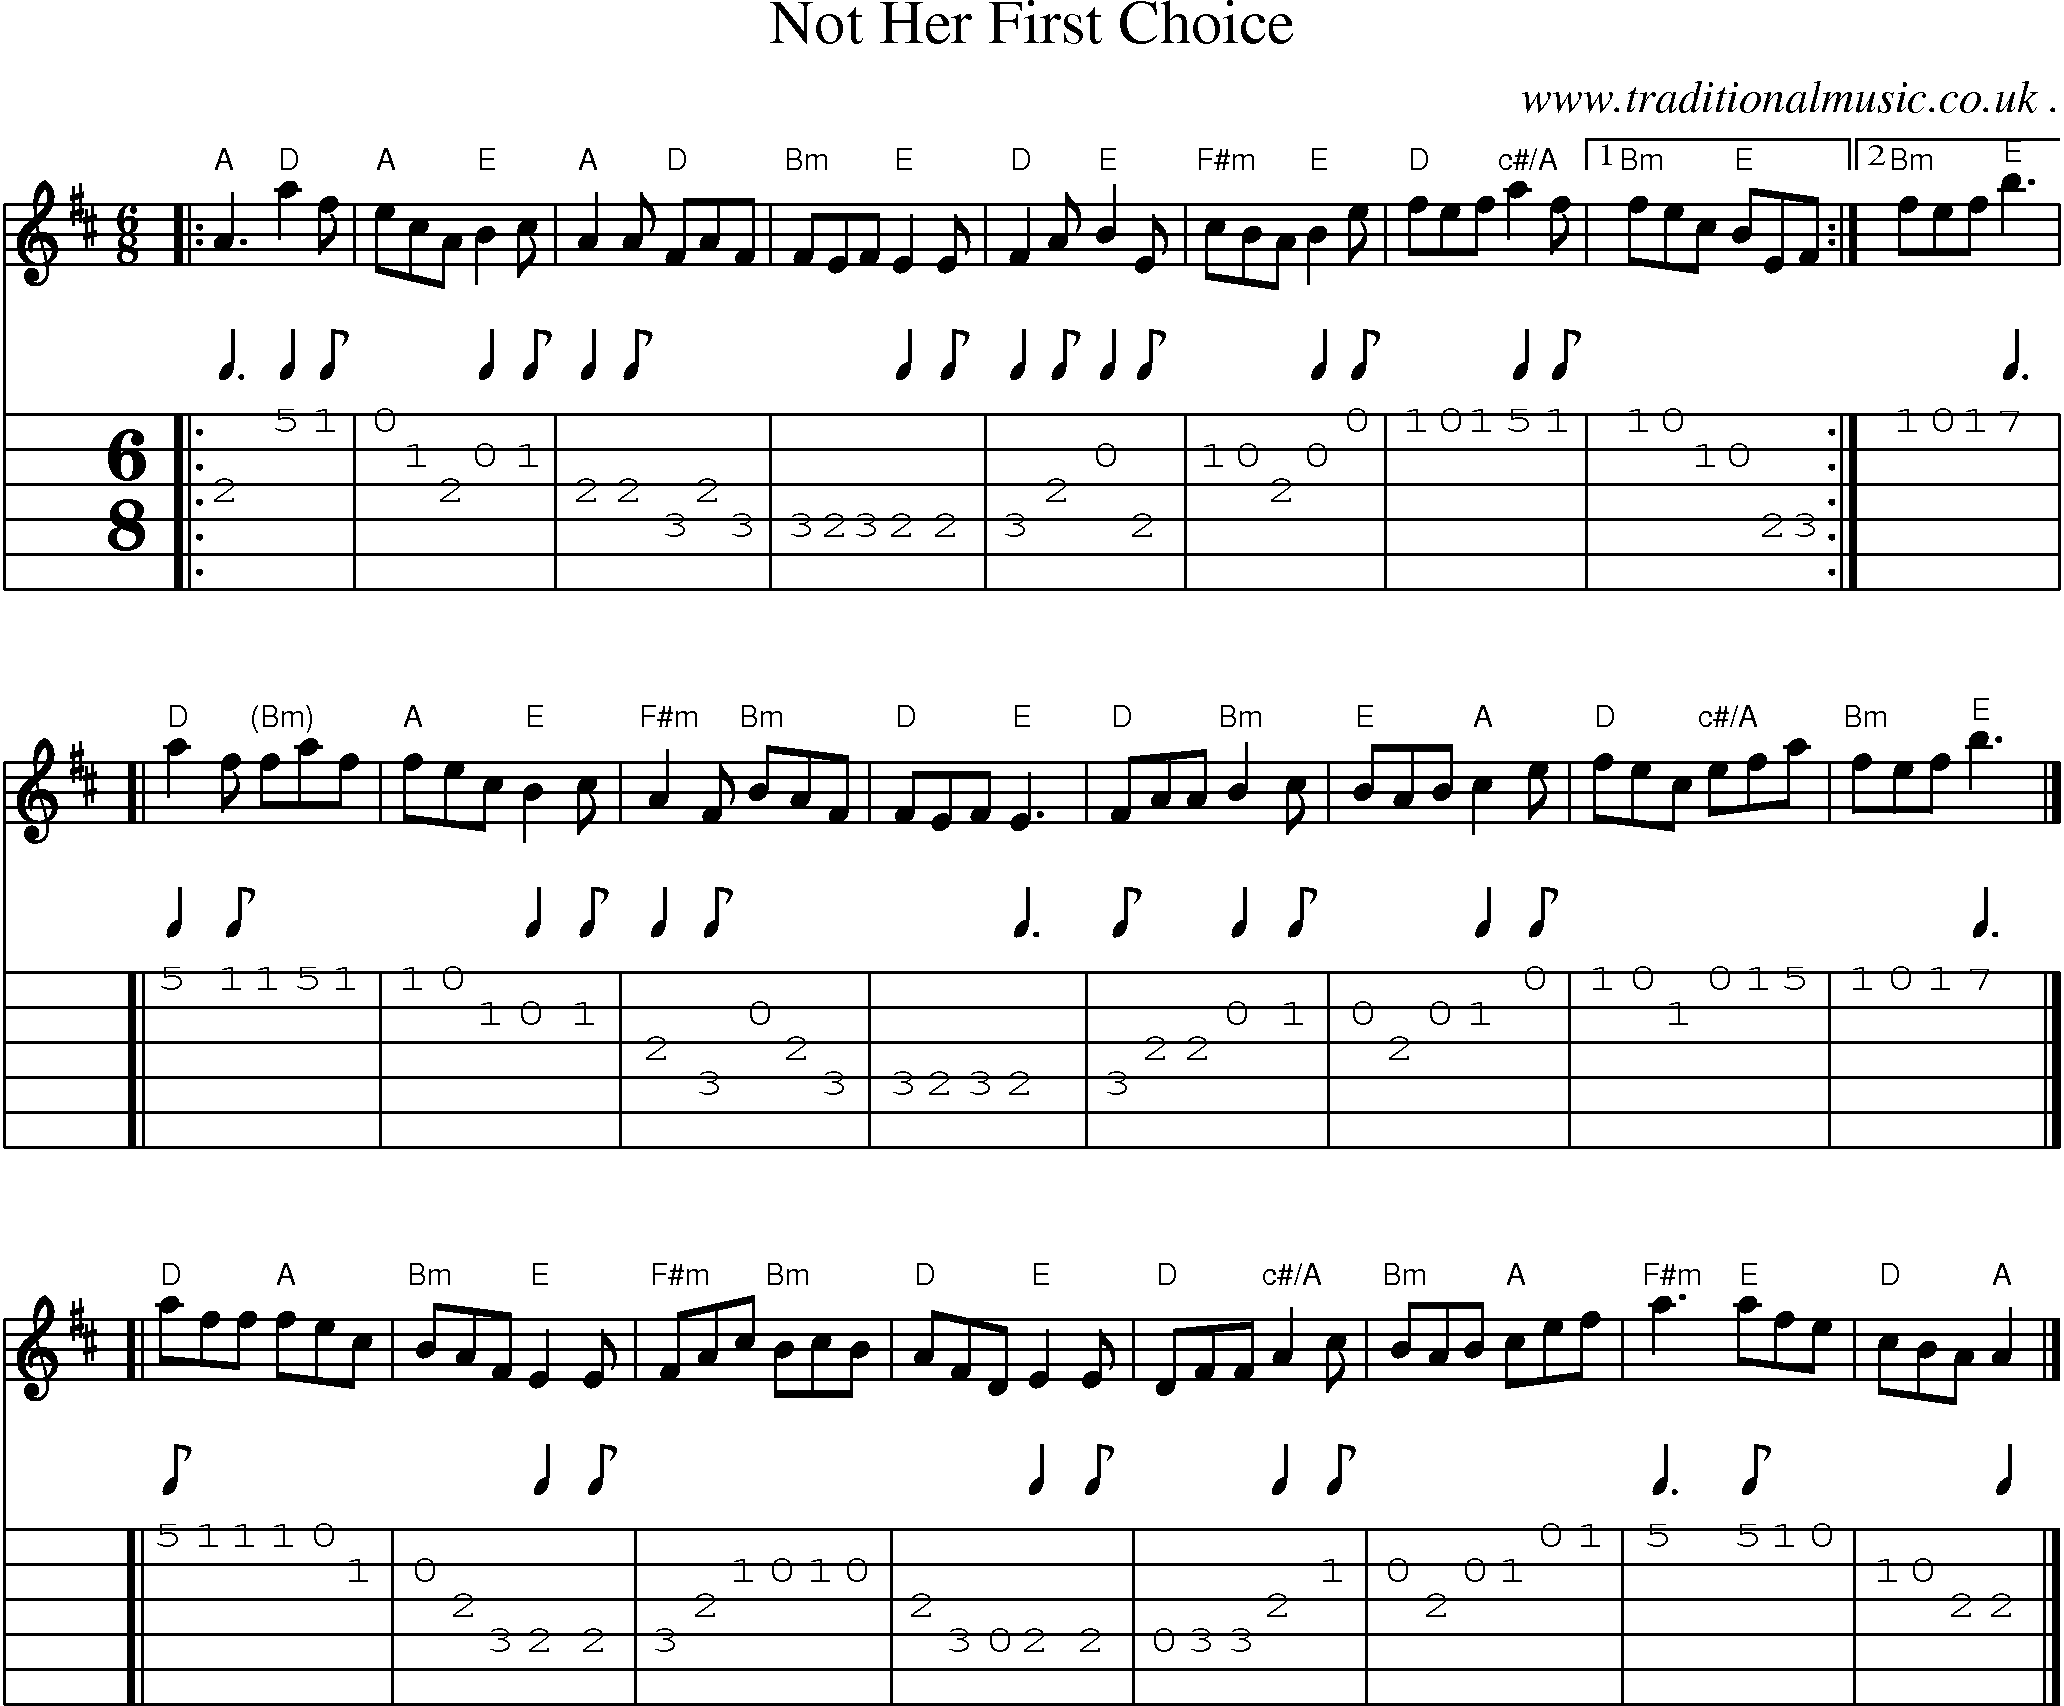 Sheet-music  score, Chords and Guitar Tabs for Not Her First Choice